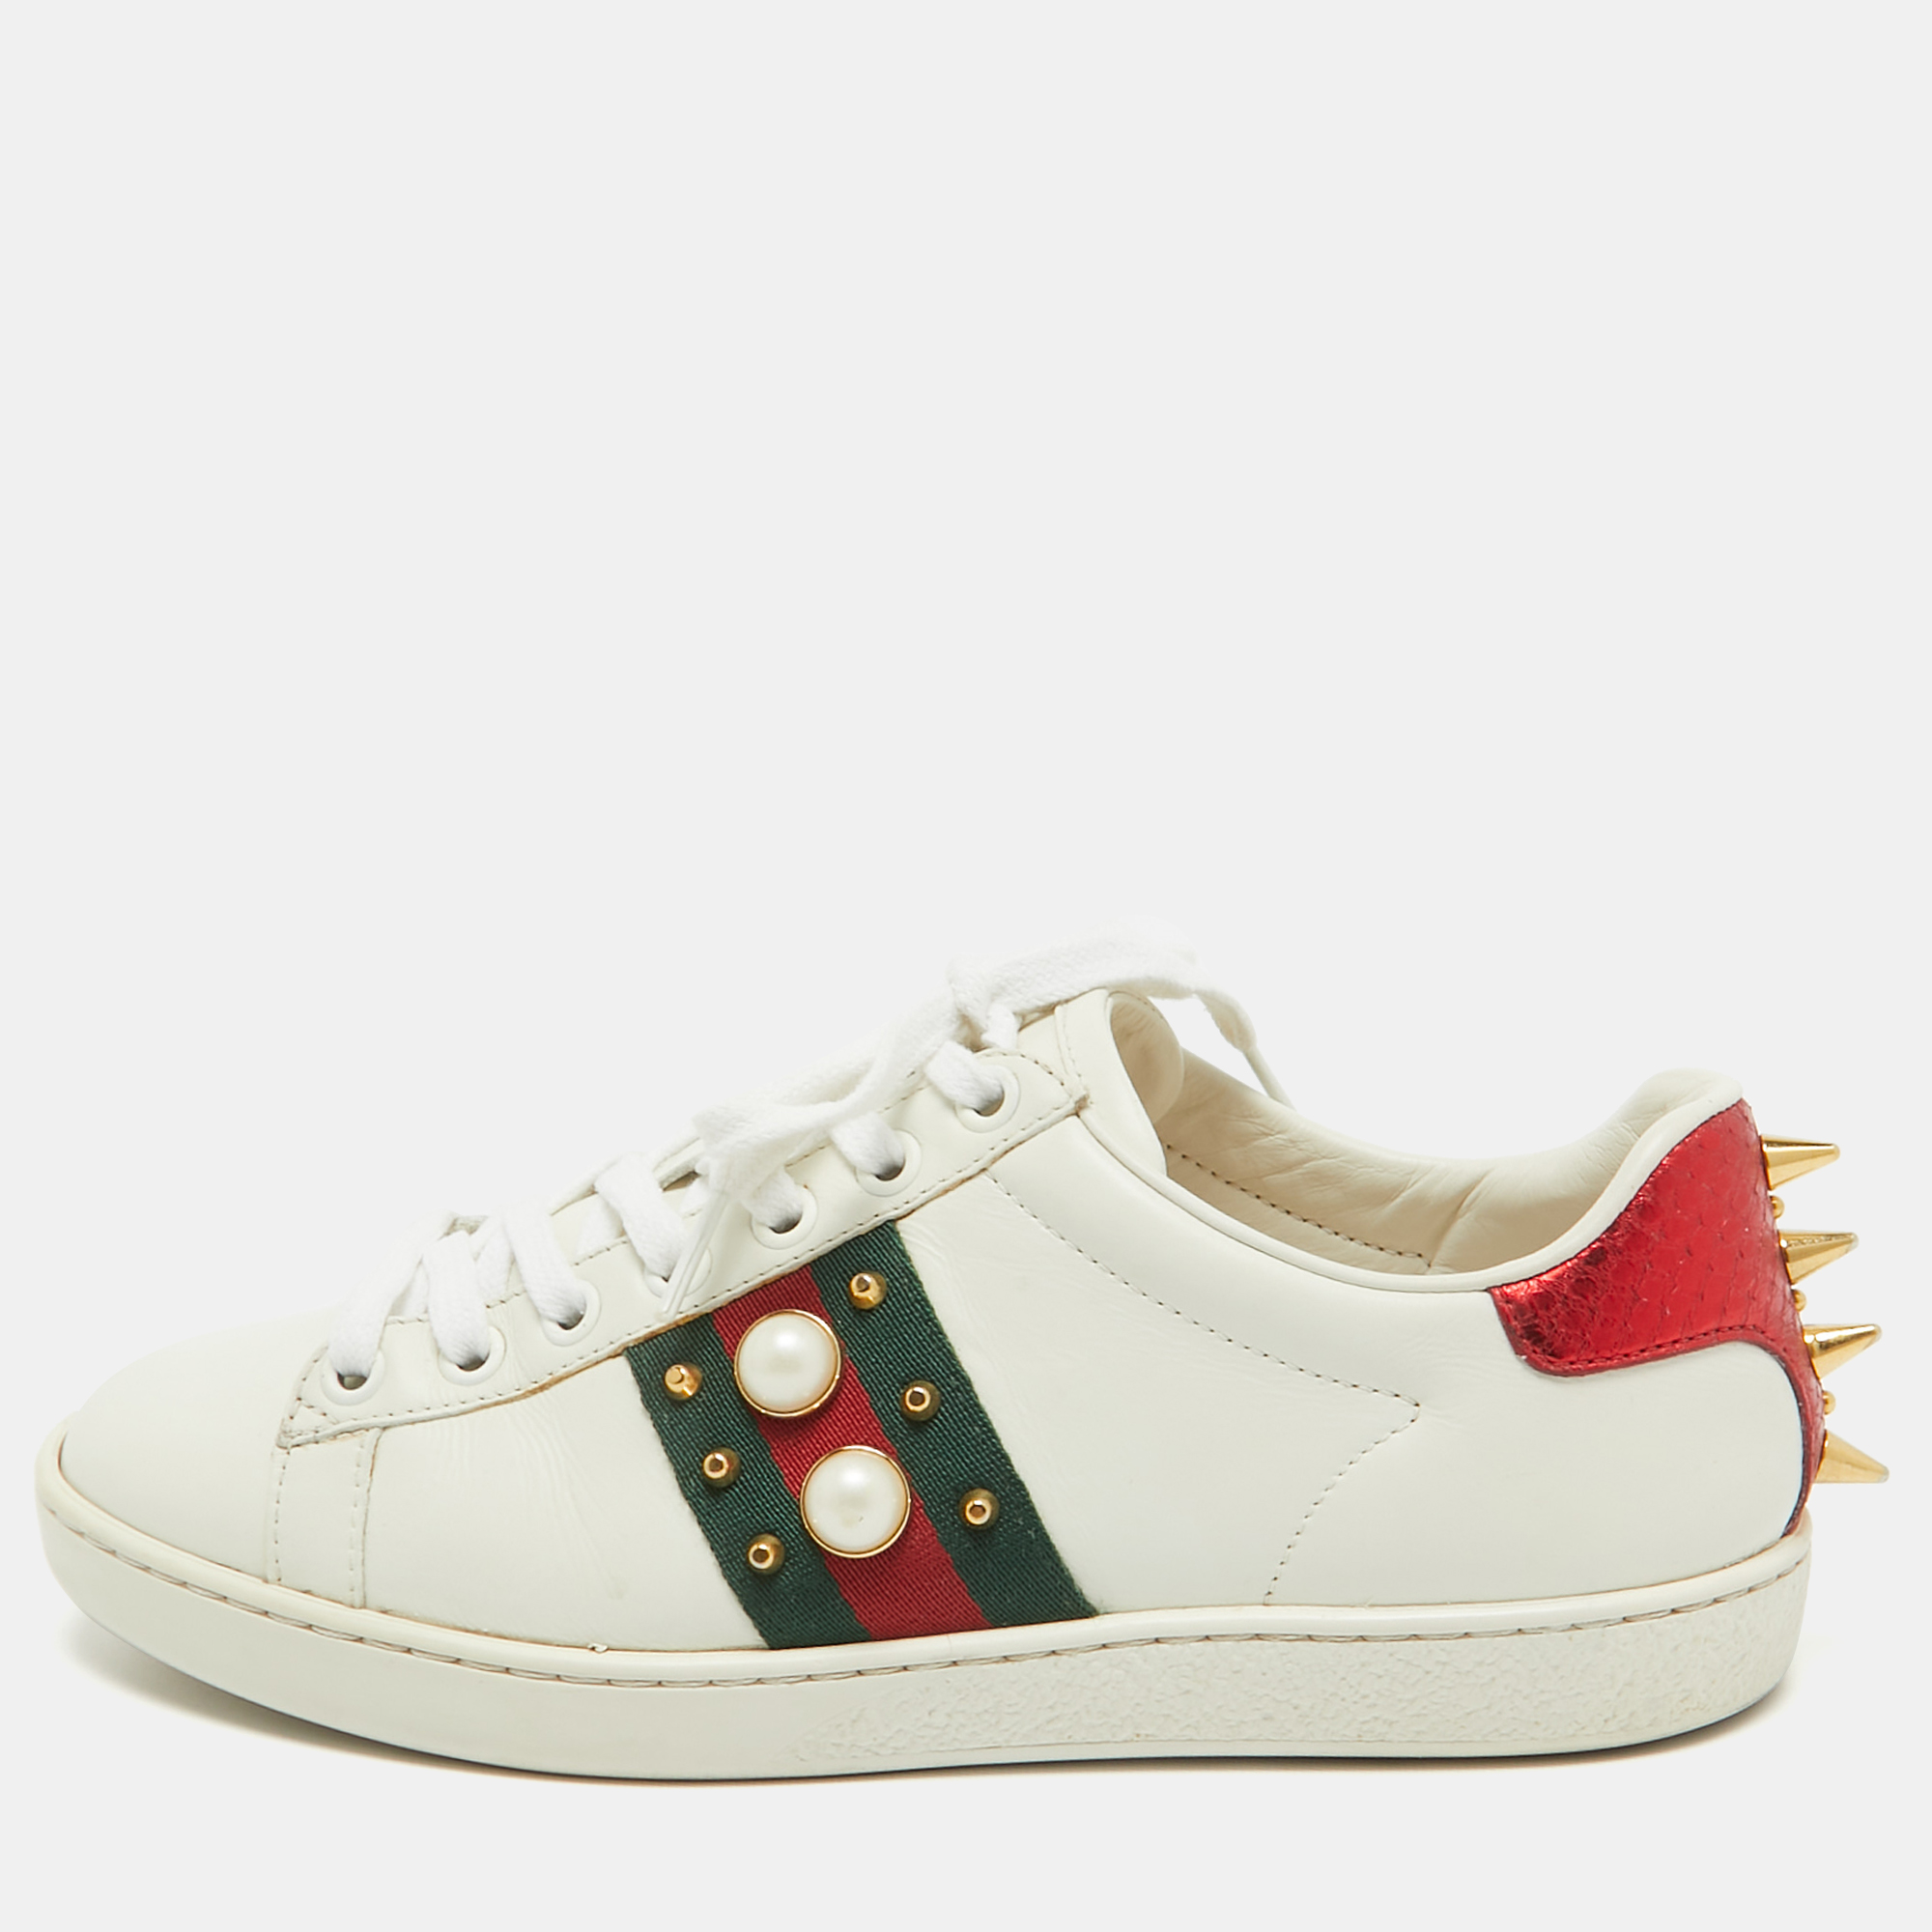 Gucci white leather faux pearl embellished ace lace up  sneakers size 35